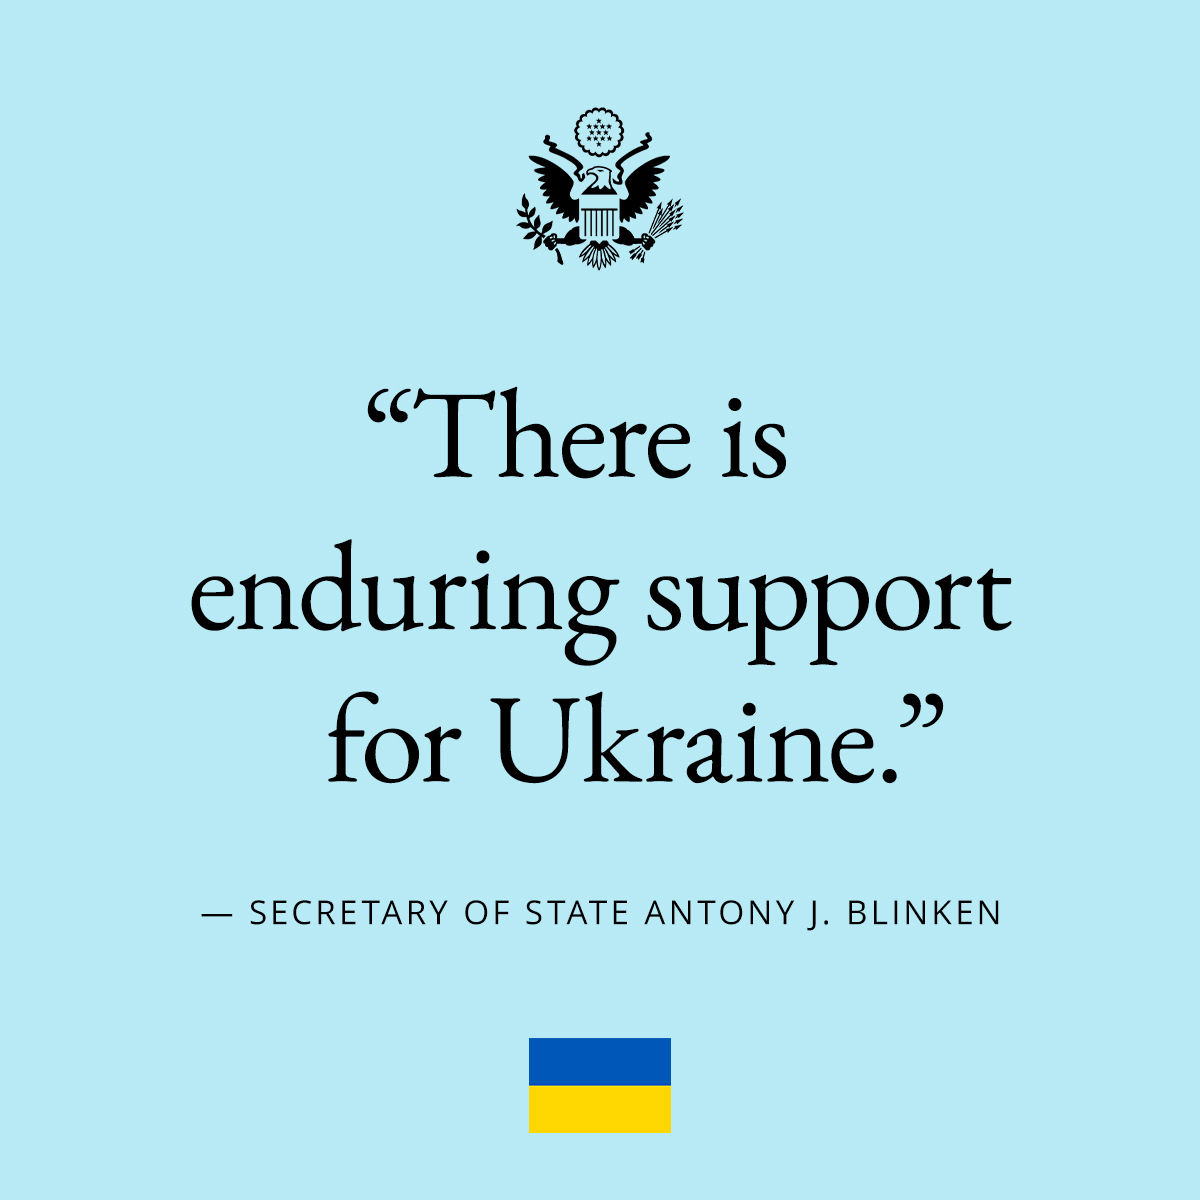 🇺🇸🇺🇦 As @POTUS said, we stand resolutely for democracy and freedom, against tyranny and oppression. We #StandWithUkraine.